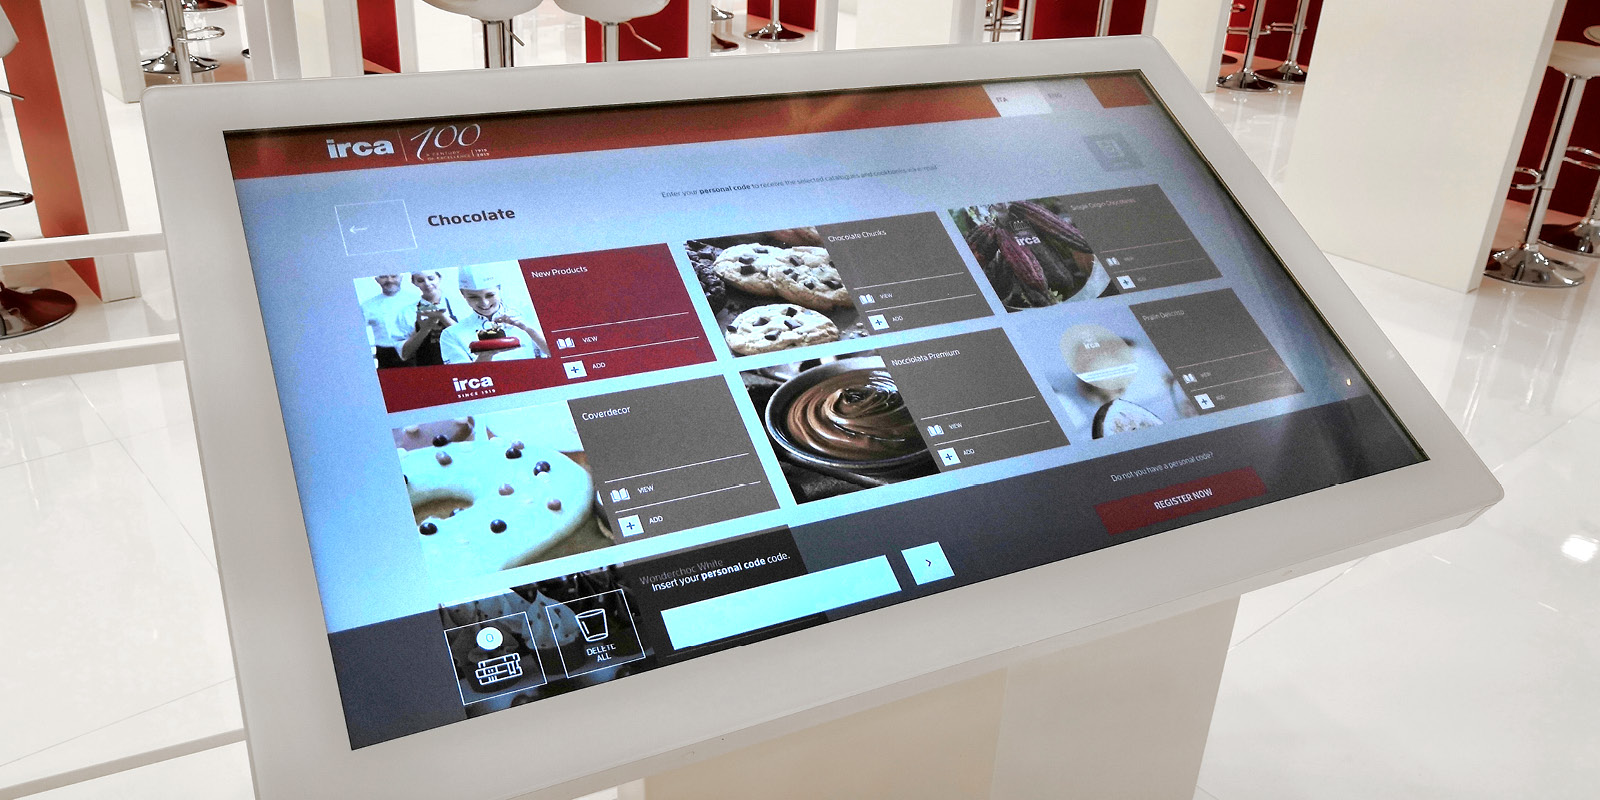 Touchwindow - The flavor of Digital Engagement